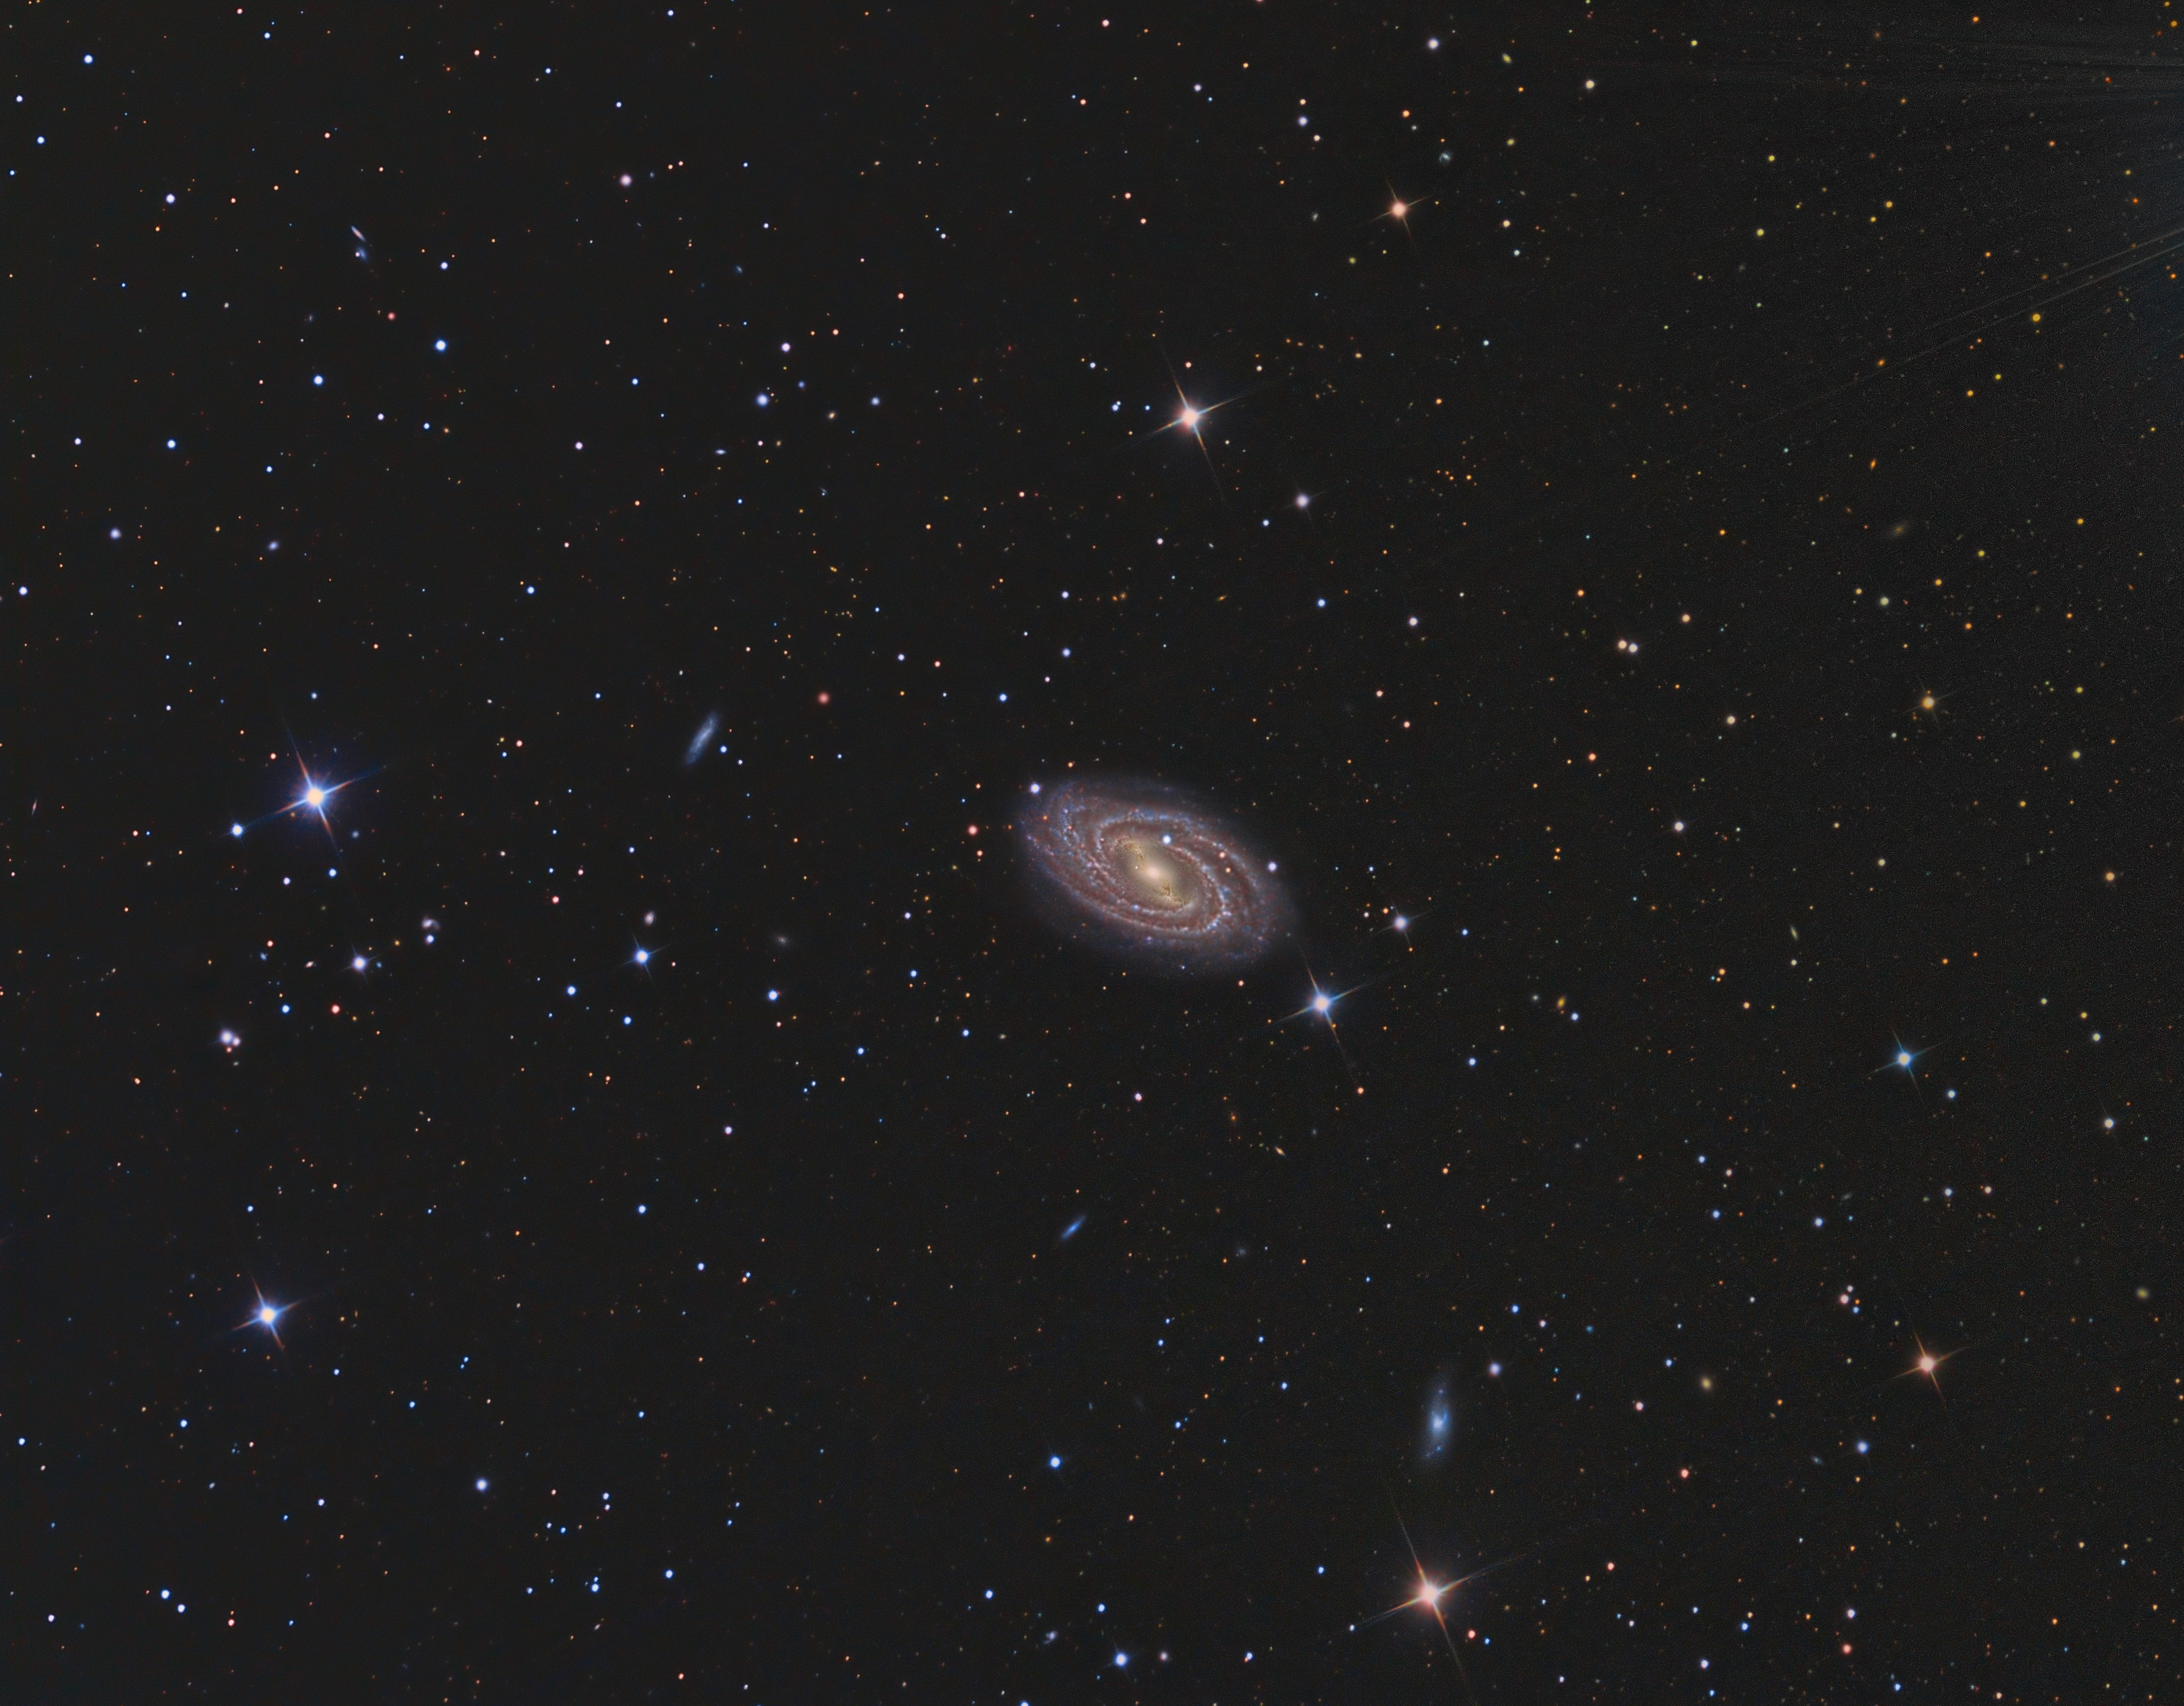 An Emirati captures a photograph of a galaxy 31 million light-years away from Earth